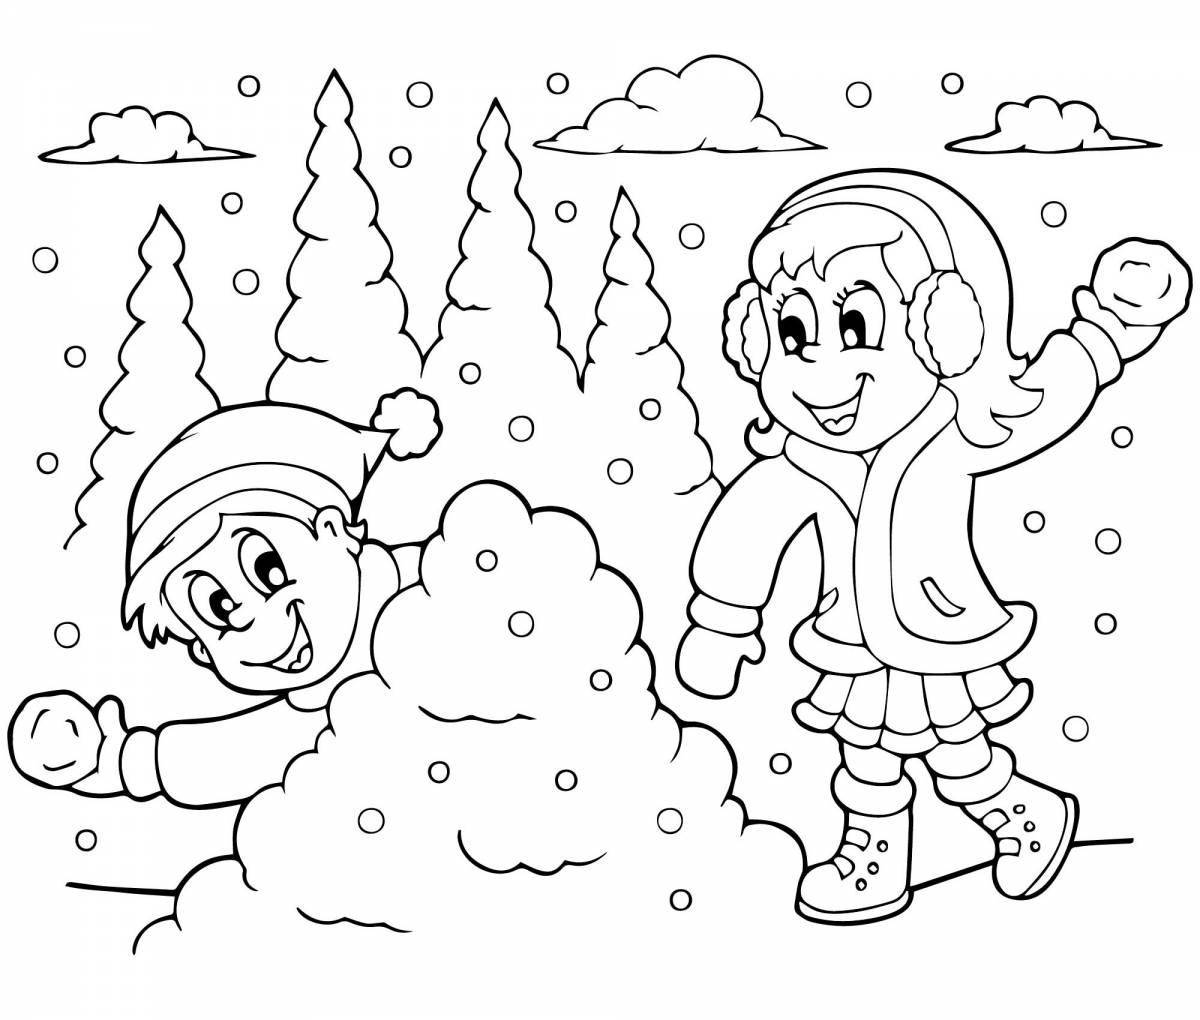 Tempting 5 year old winter coloring book